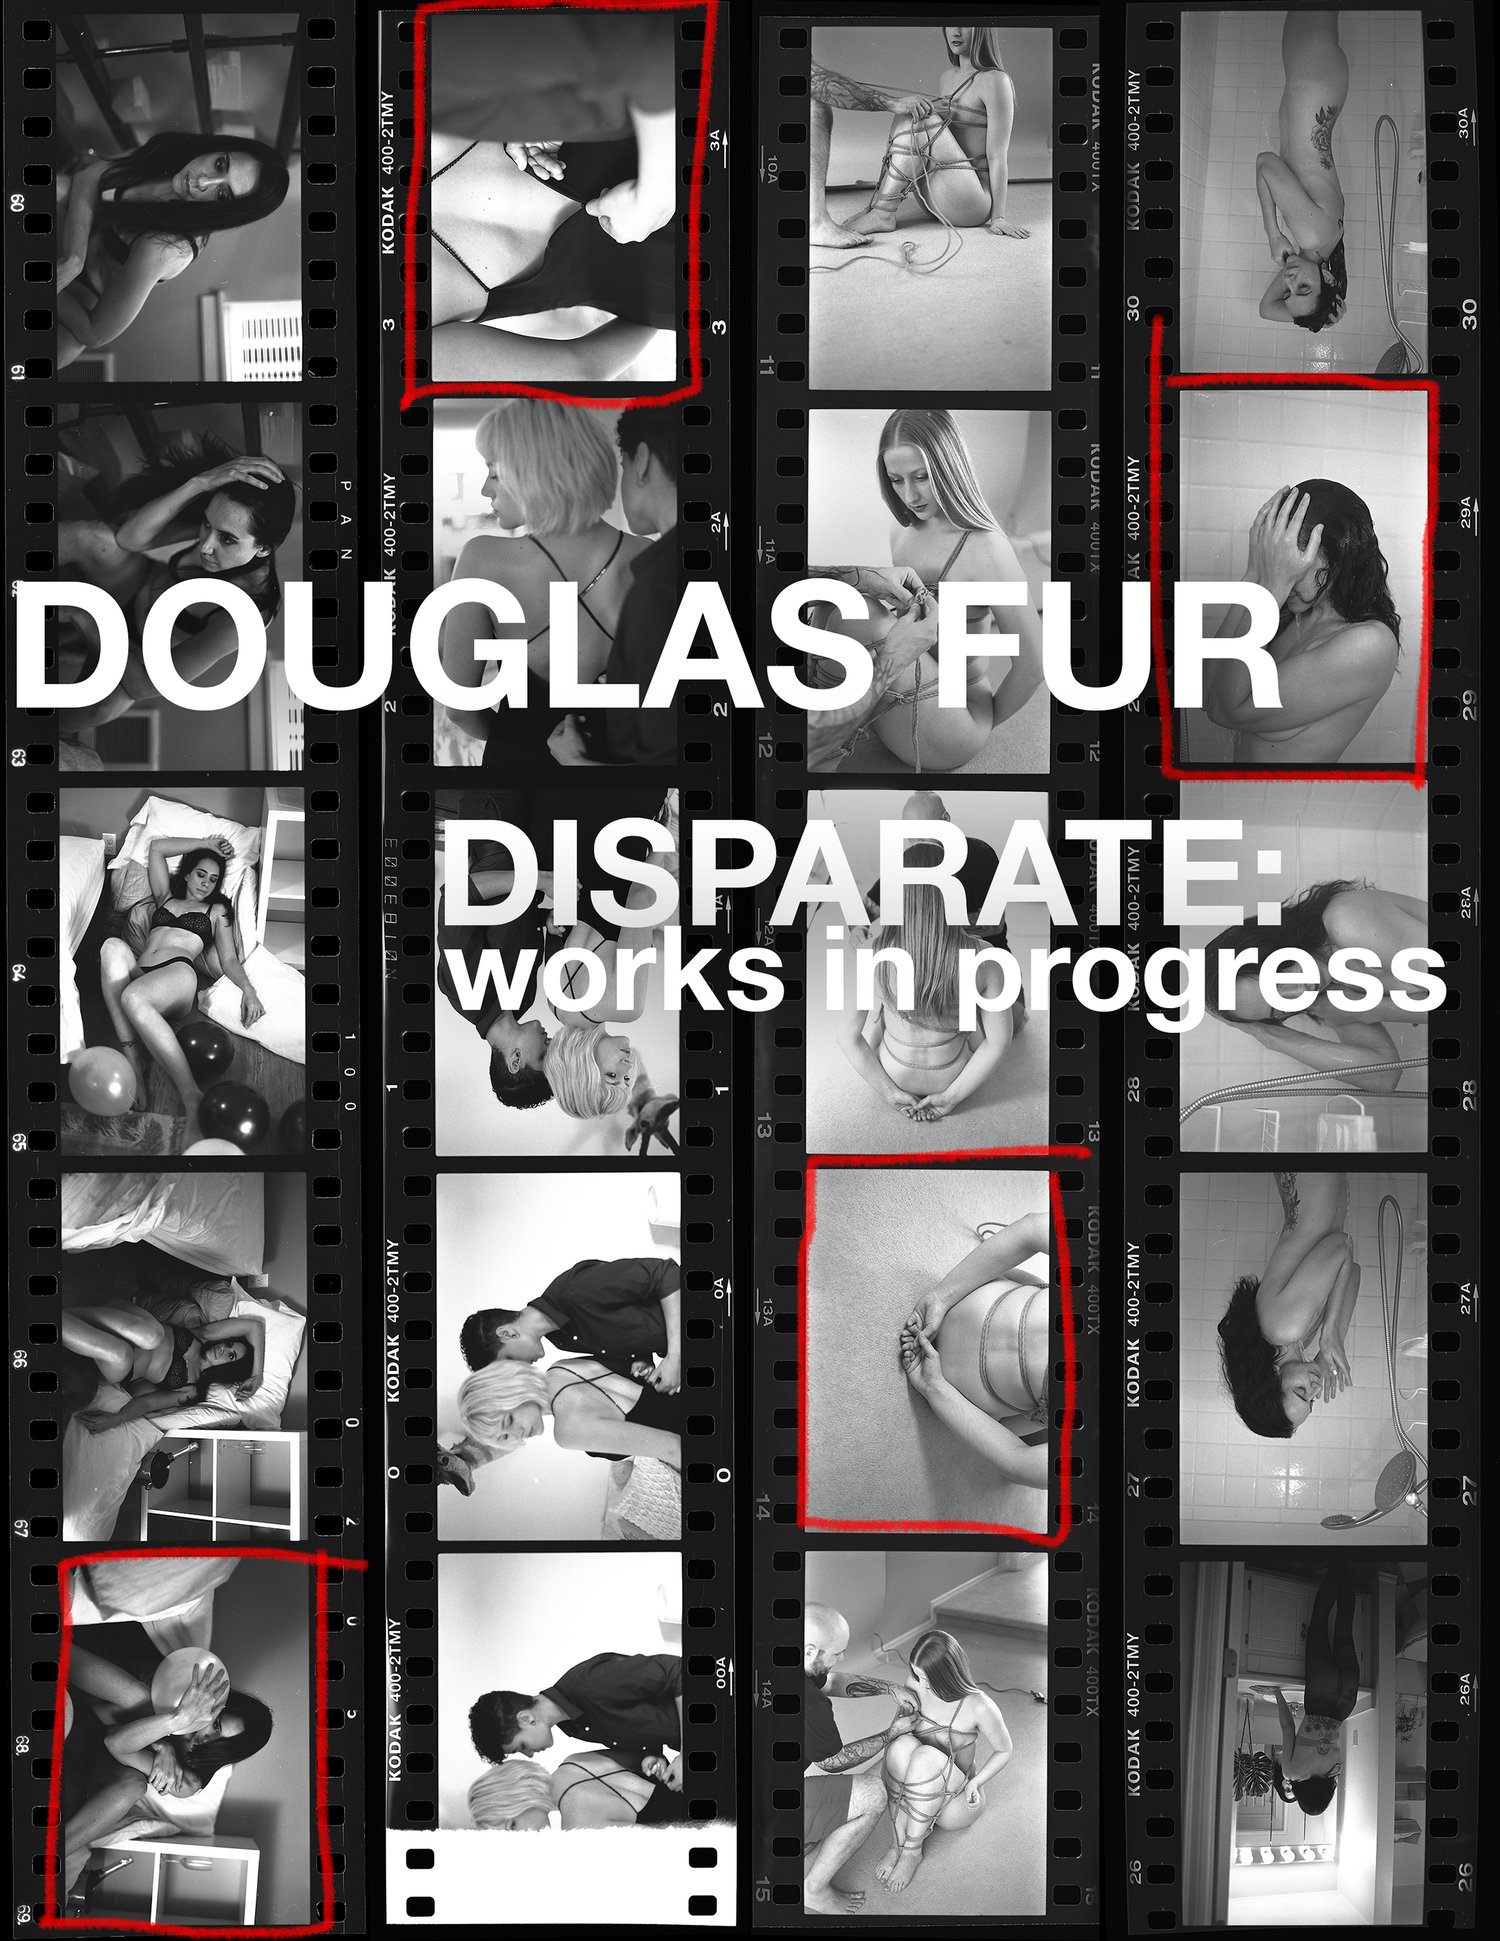 Disparate: works in progress (book available through blurb.com)